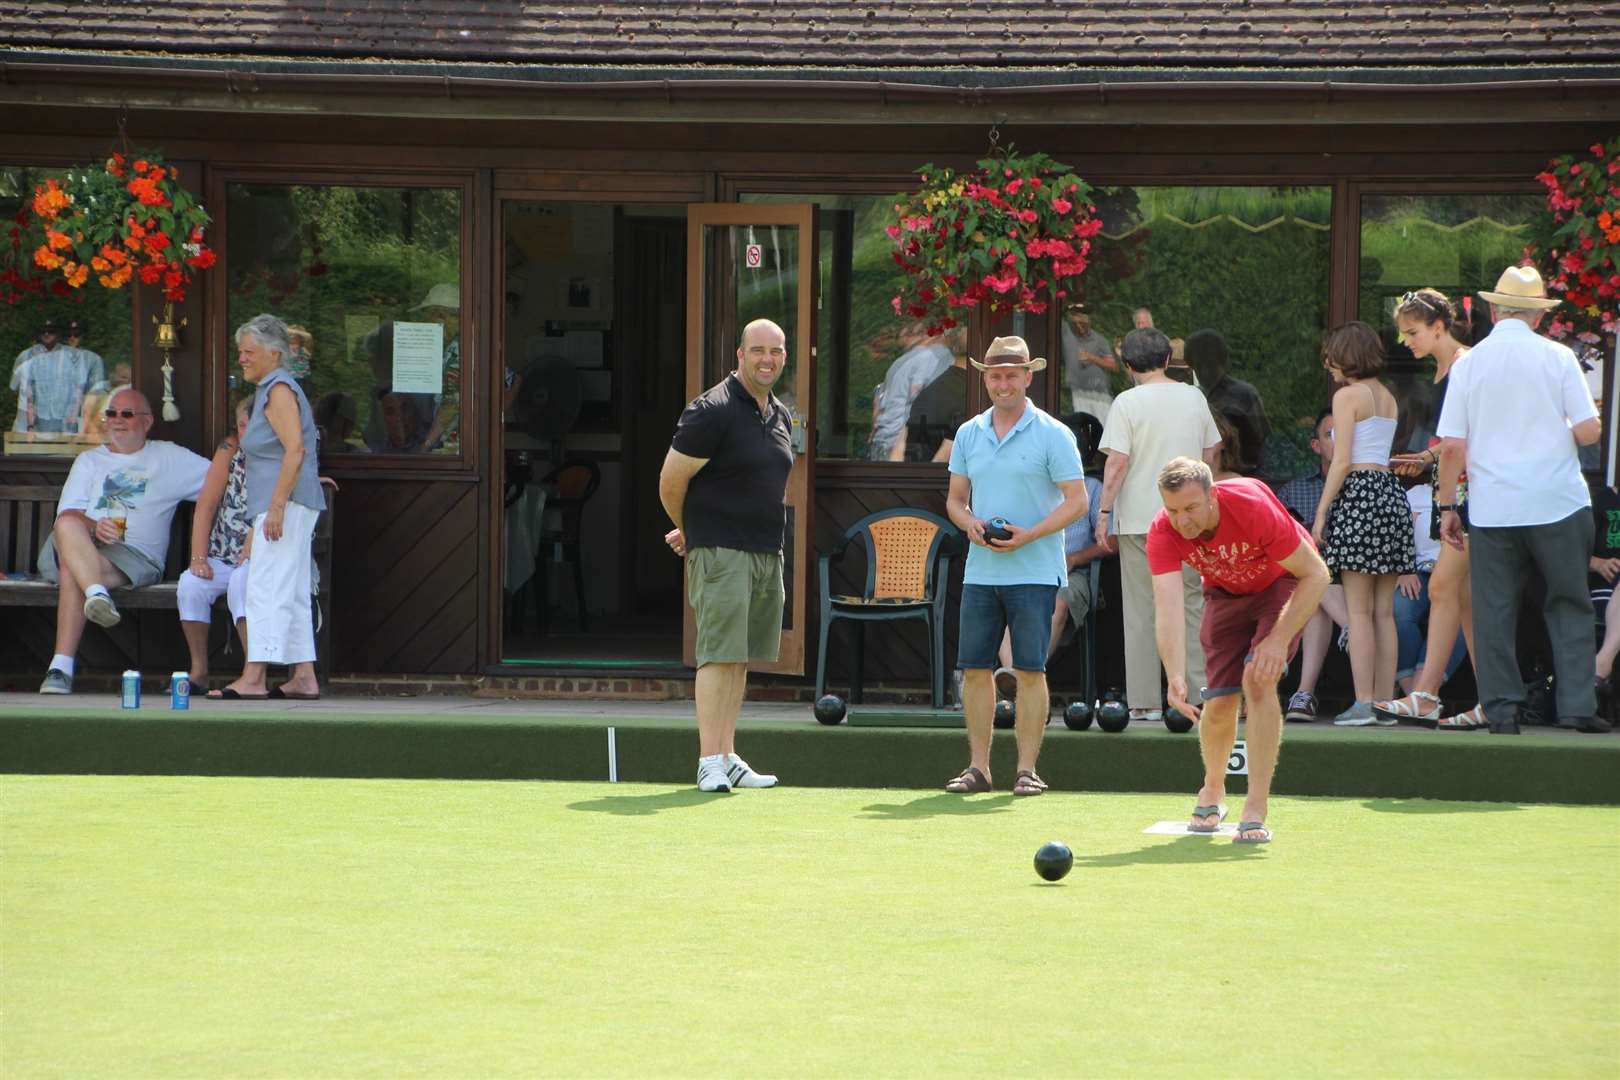 A previous event at the Marden Bowls Club in Howland Road